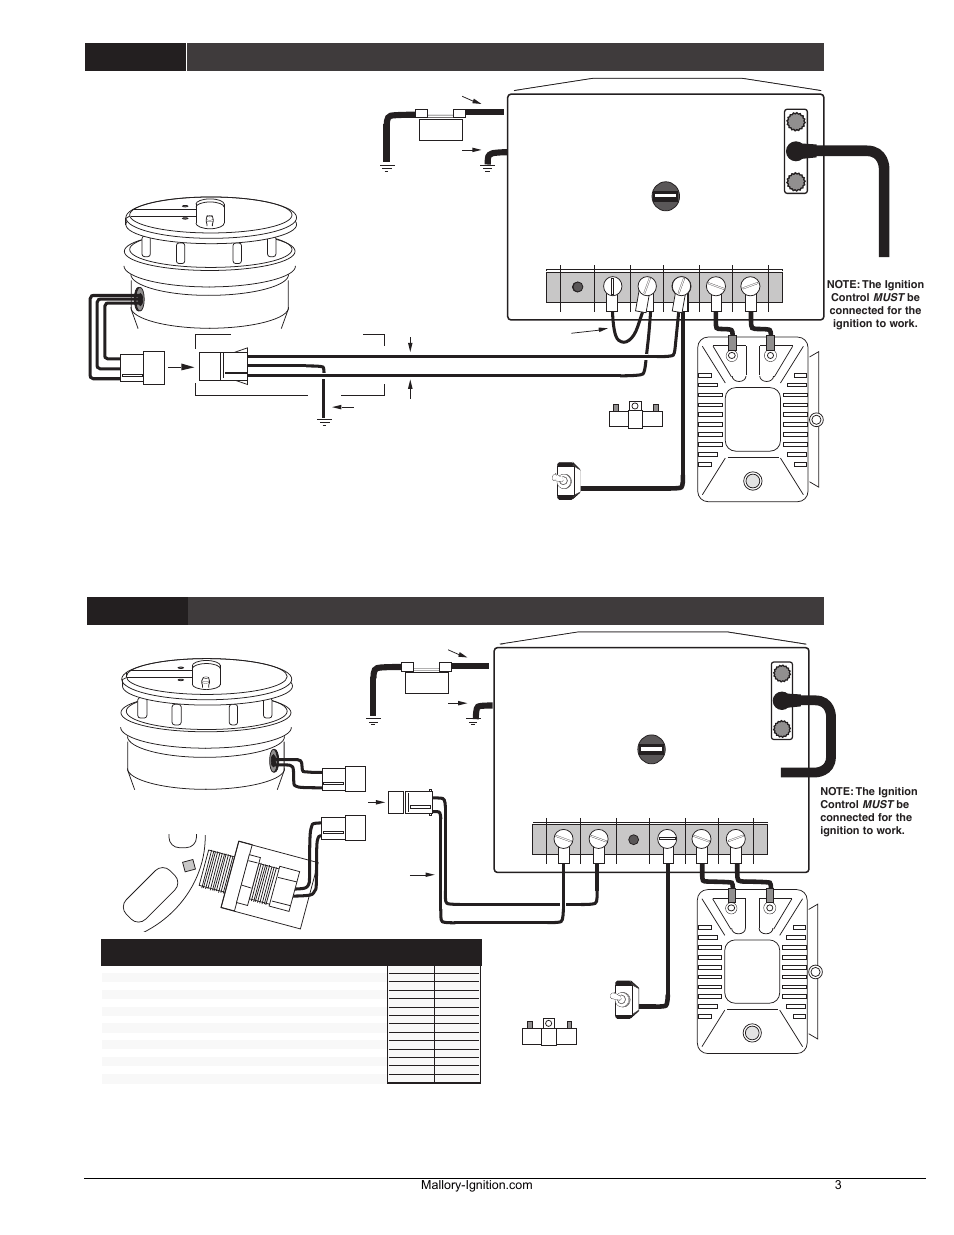 Wiring Diagram For Mallory 29026 Hyfire Ignition